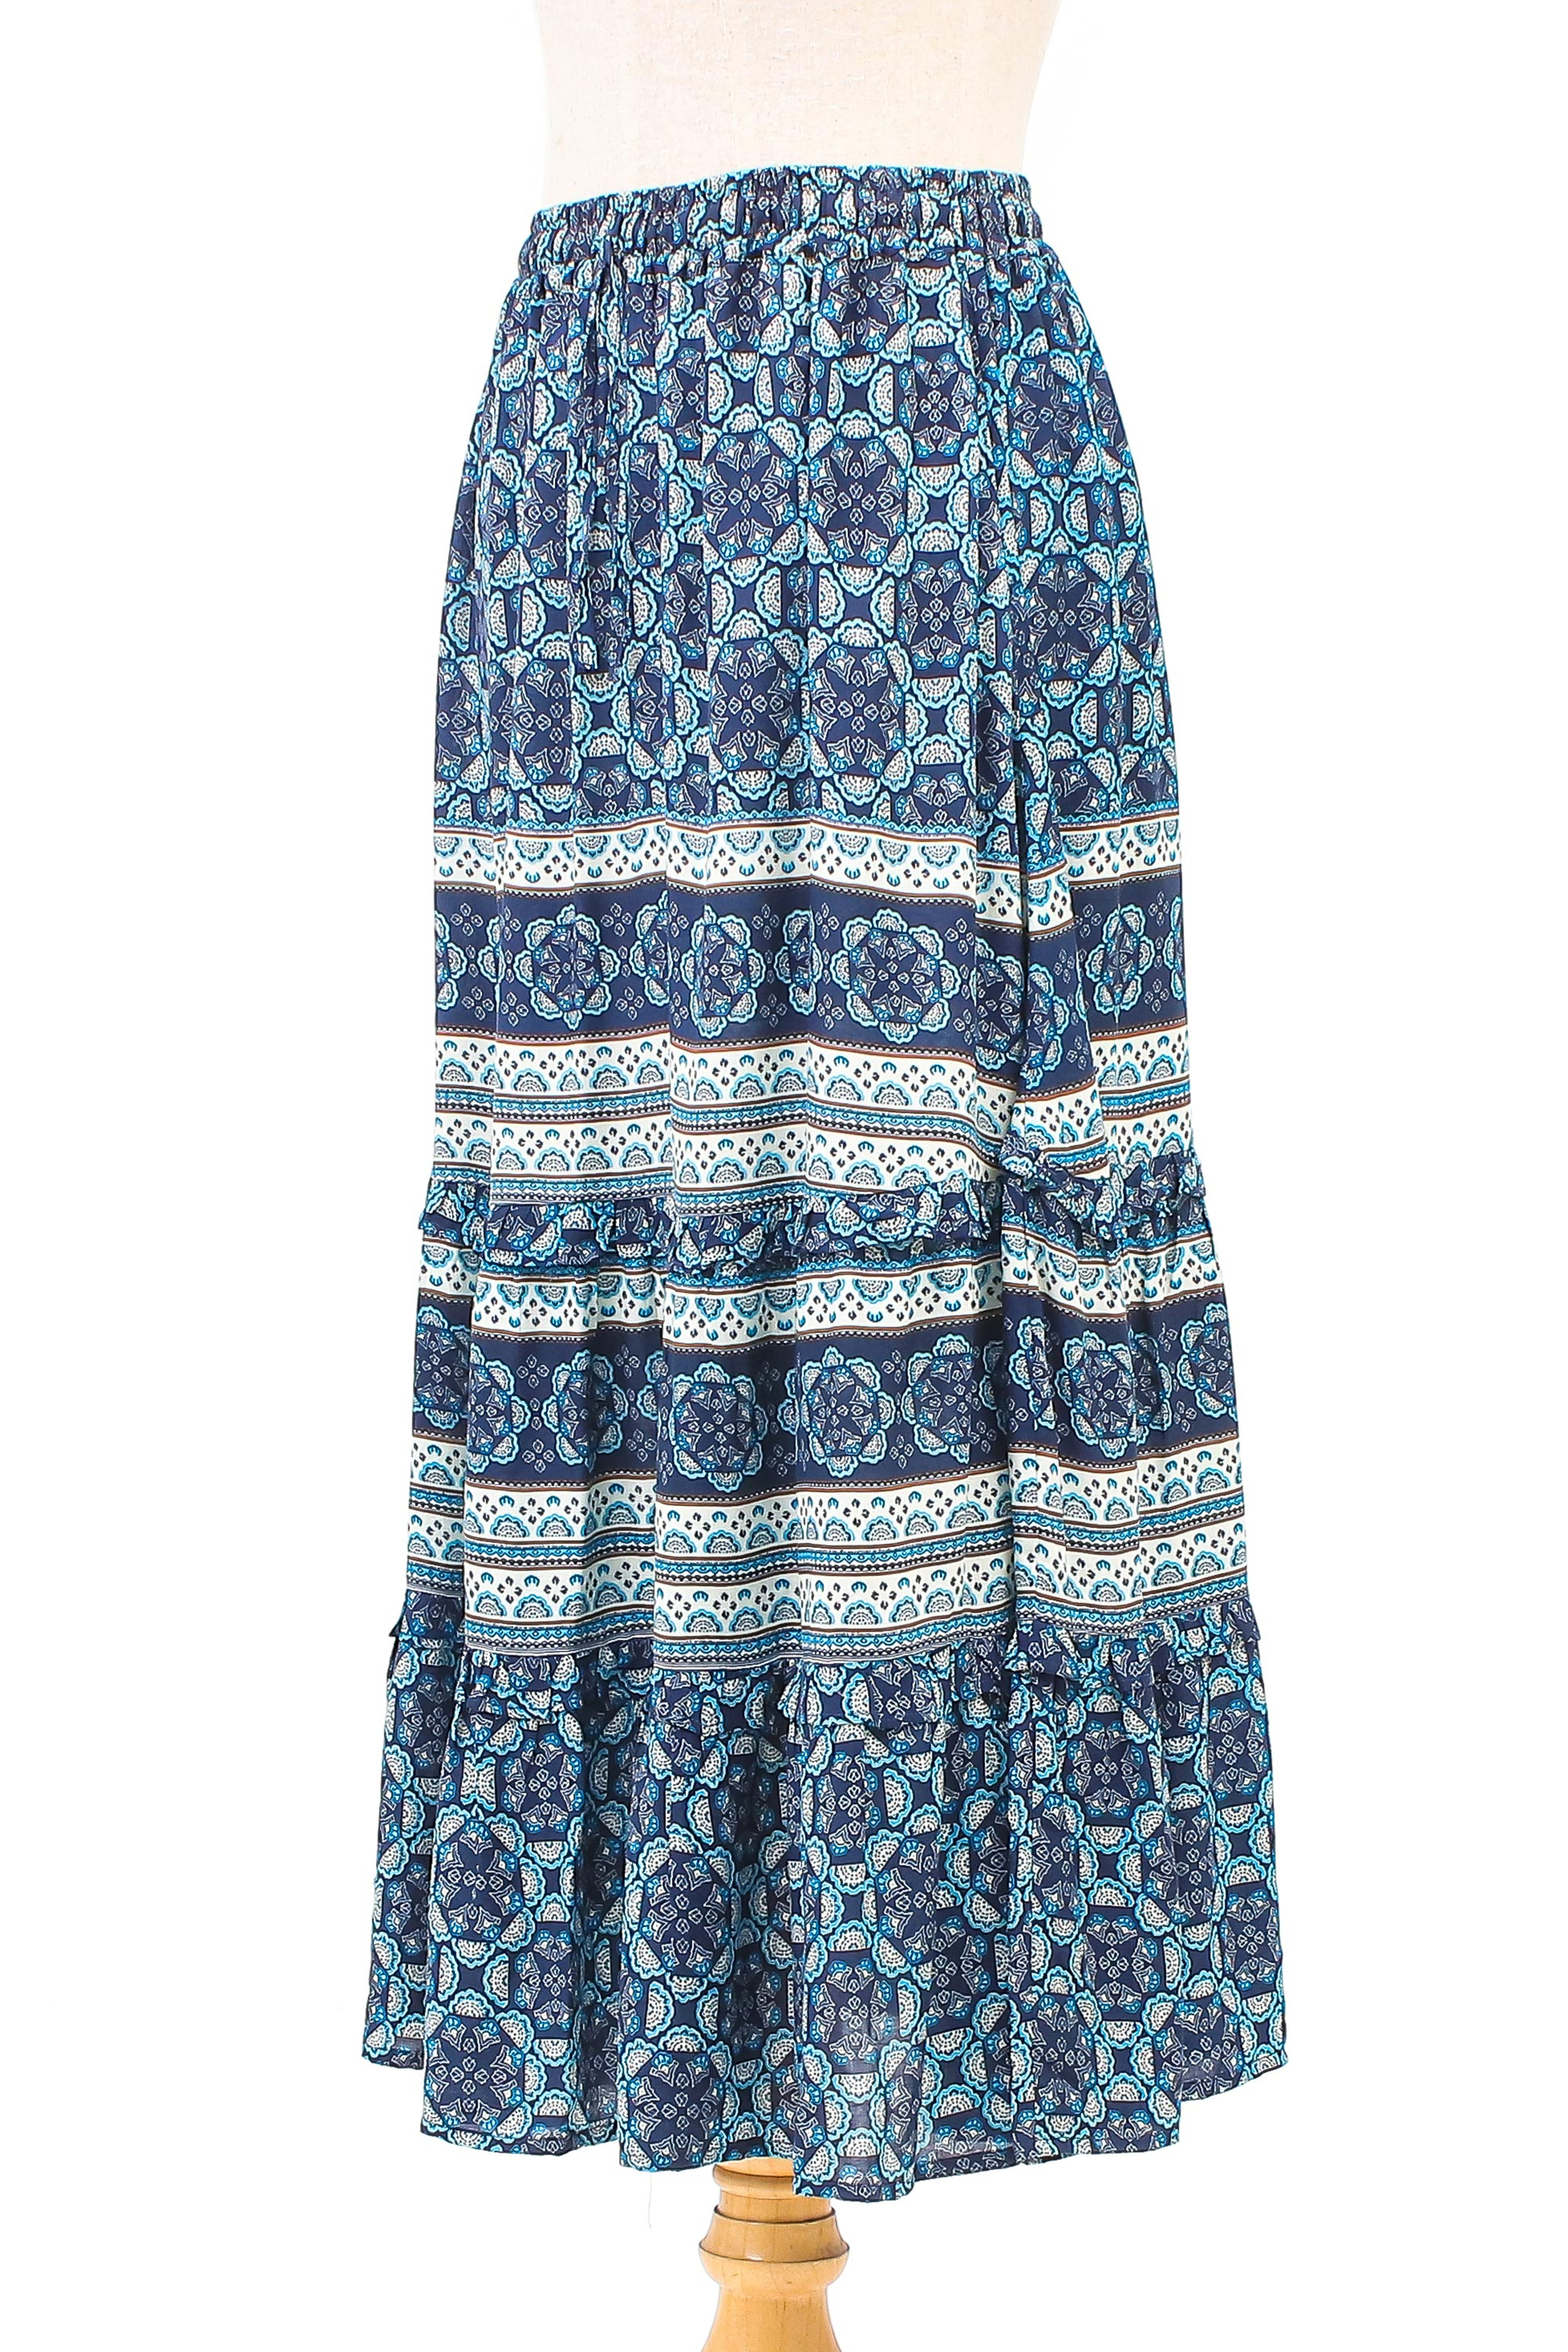 Floral Motif Printed Rayon Skirt from Thailand - Fascinating Night | NOVICA